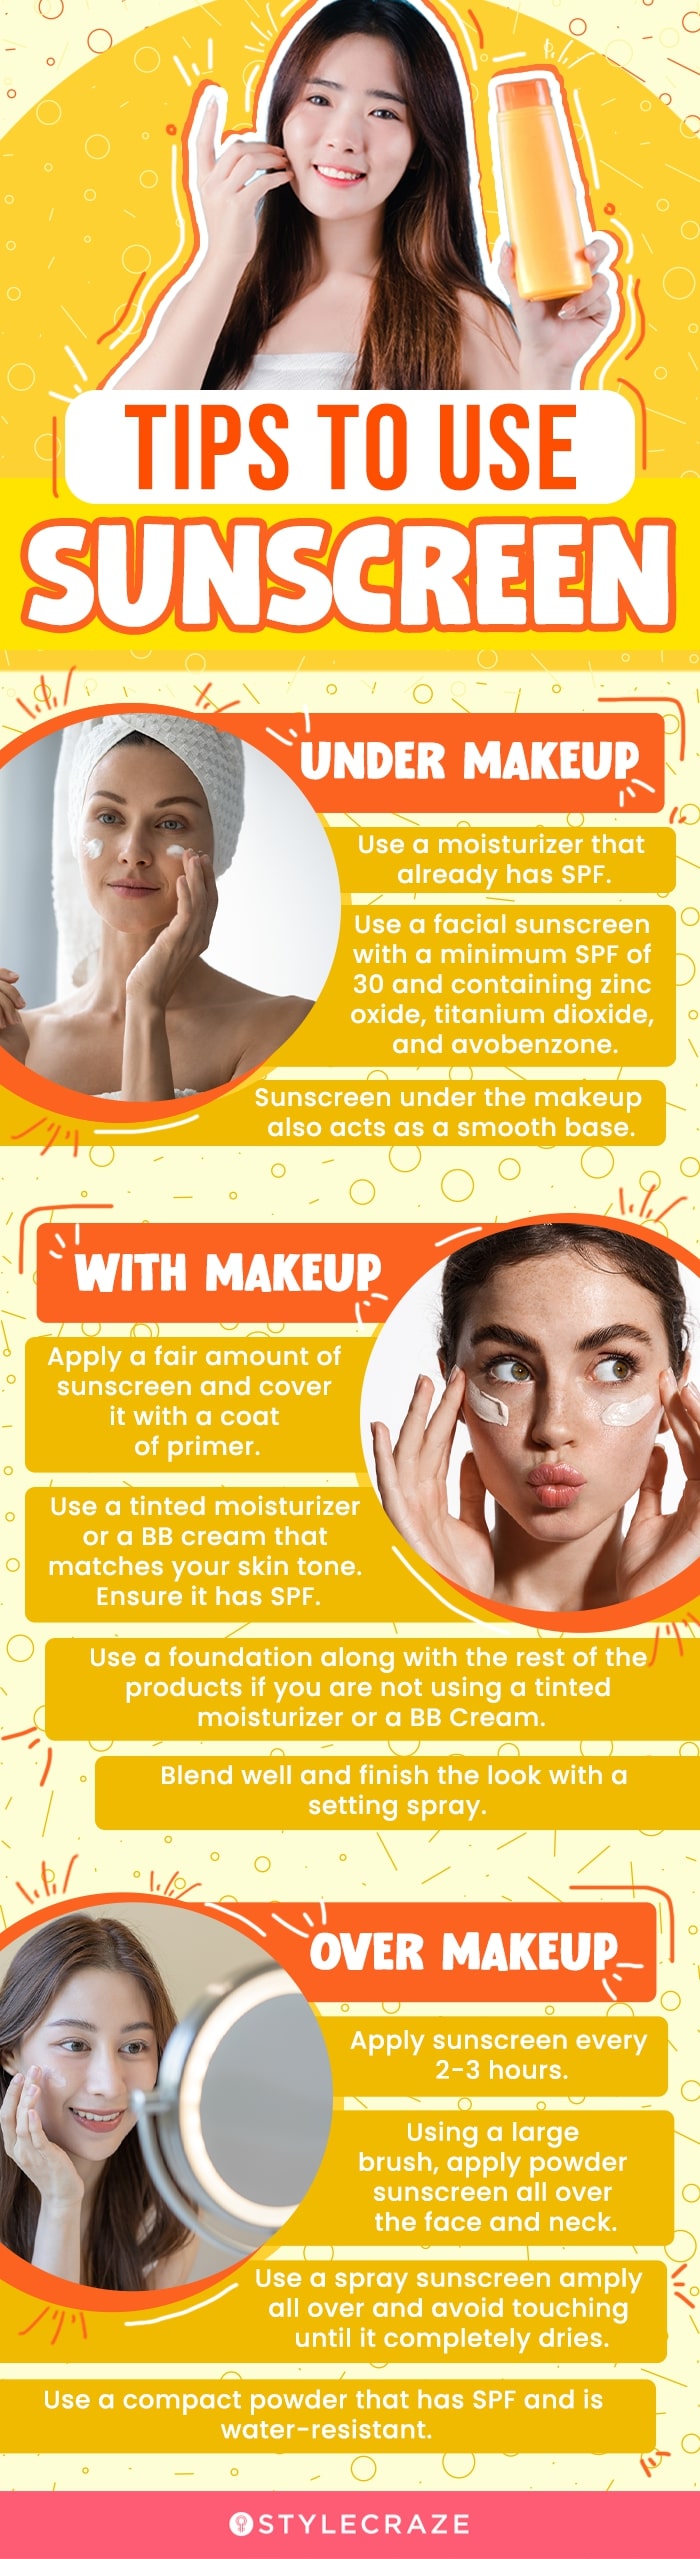 tips to use sunscreen (infographic)